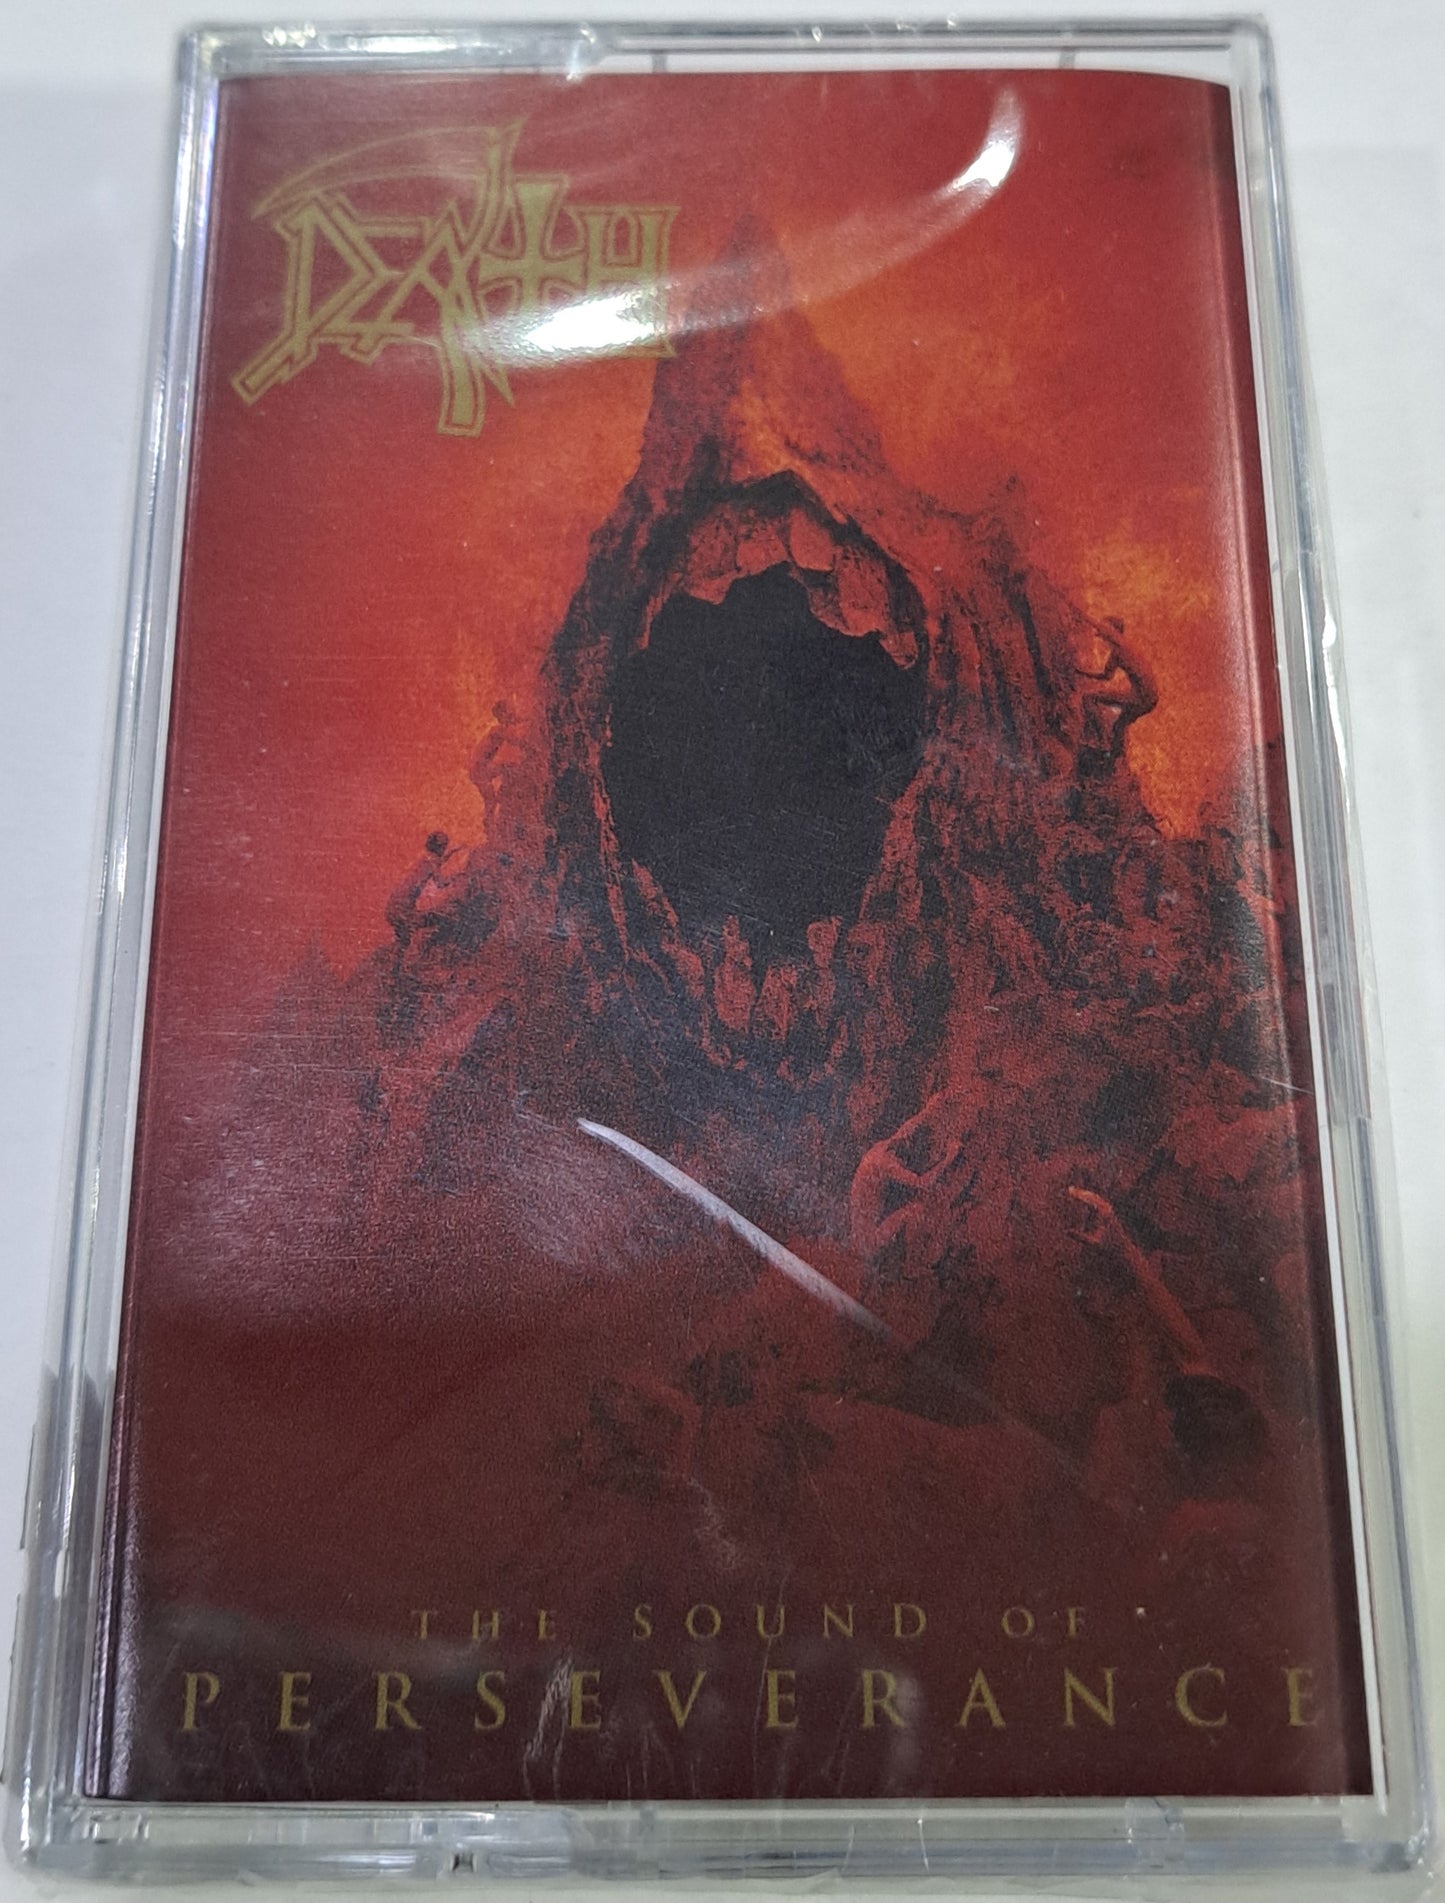 DEATH - THE SOUND OF PERSEVERANCE  CASSETTE